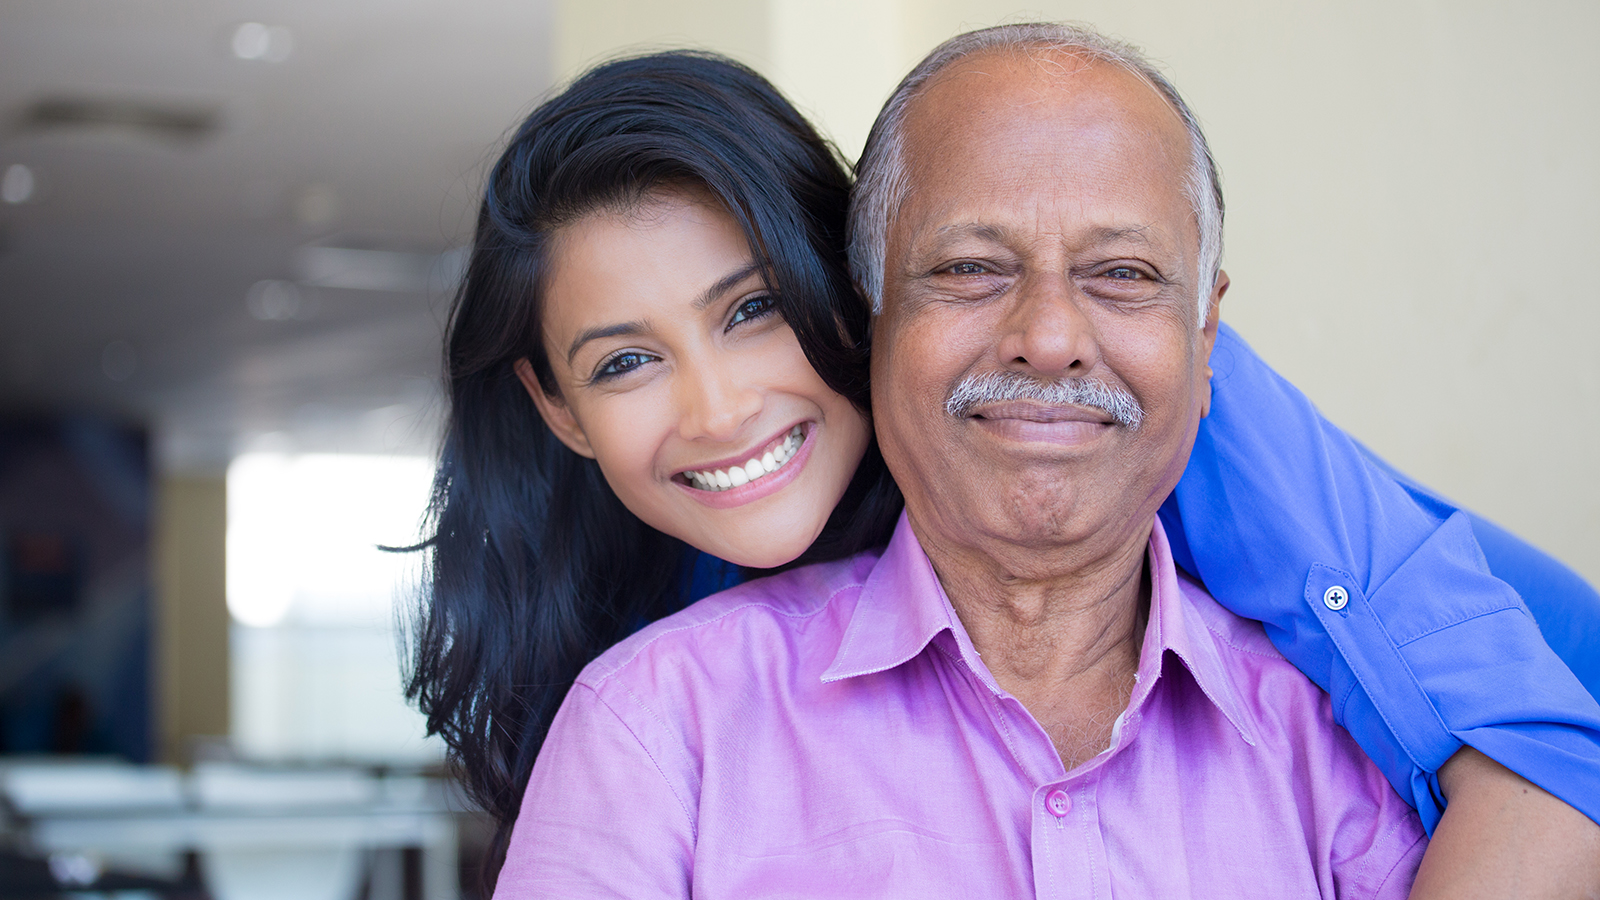 Closeup portrait, family, young woman in blue shirt holding older man in pink collar button down from behind, happy isolated indoors home background